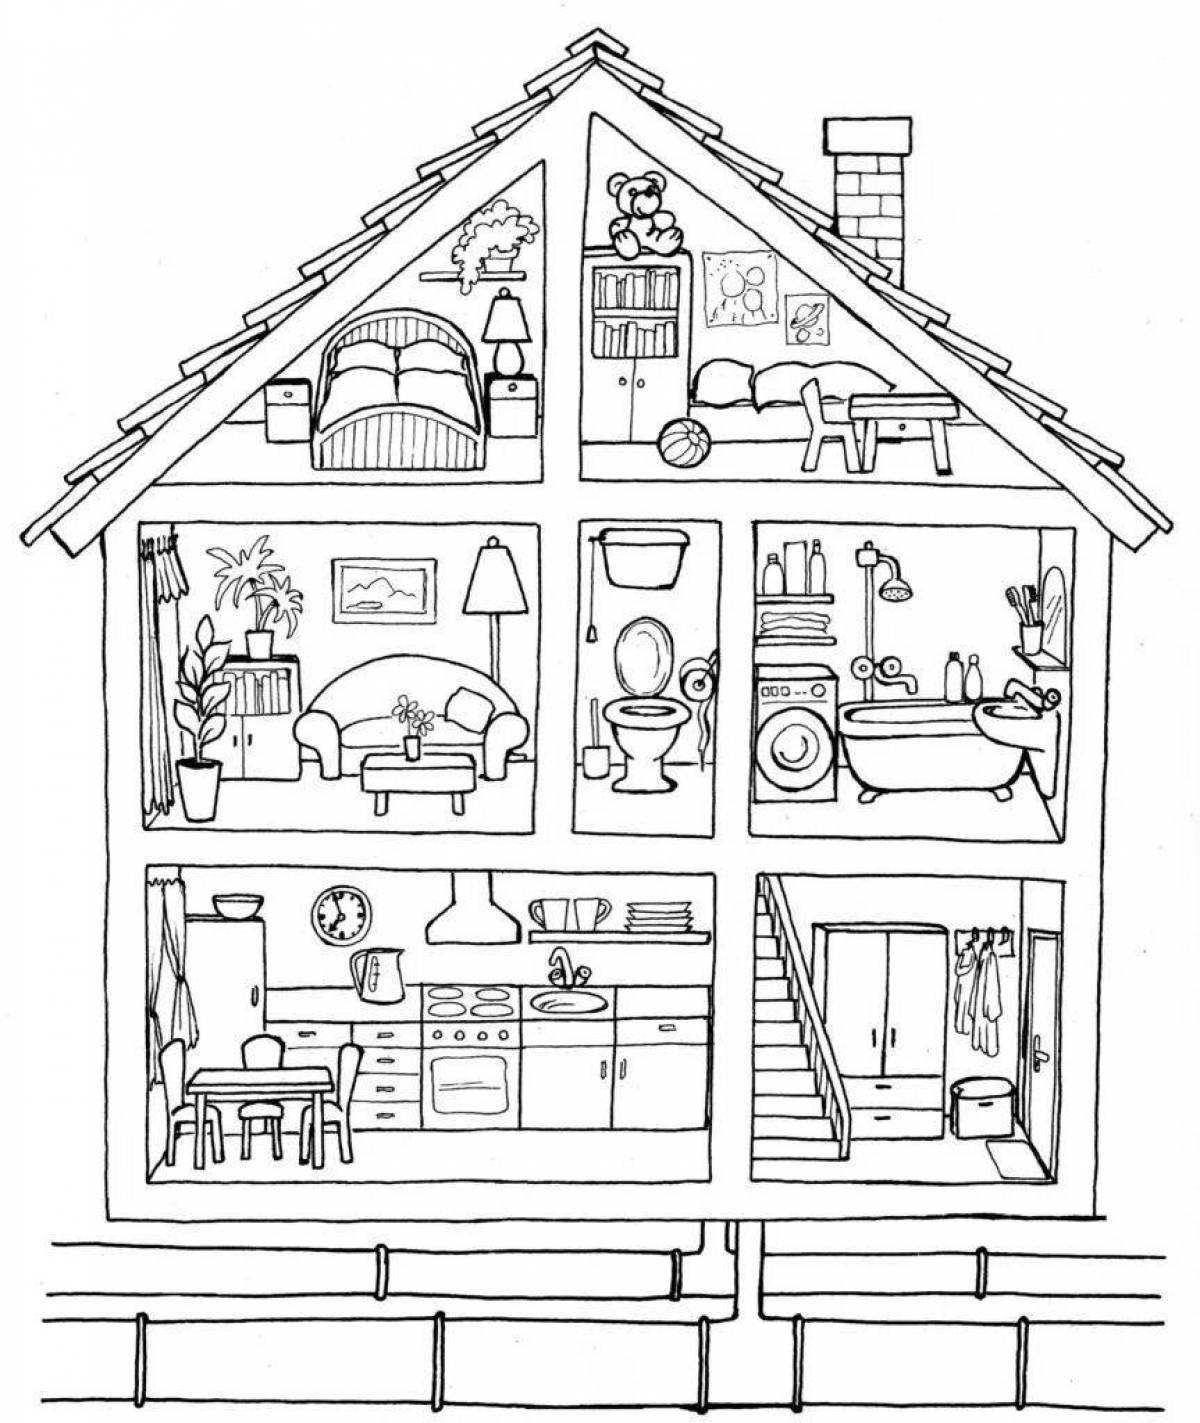 Colorful children's world house coloring book